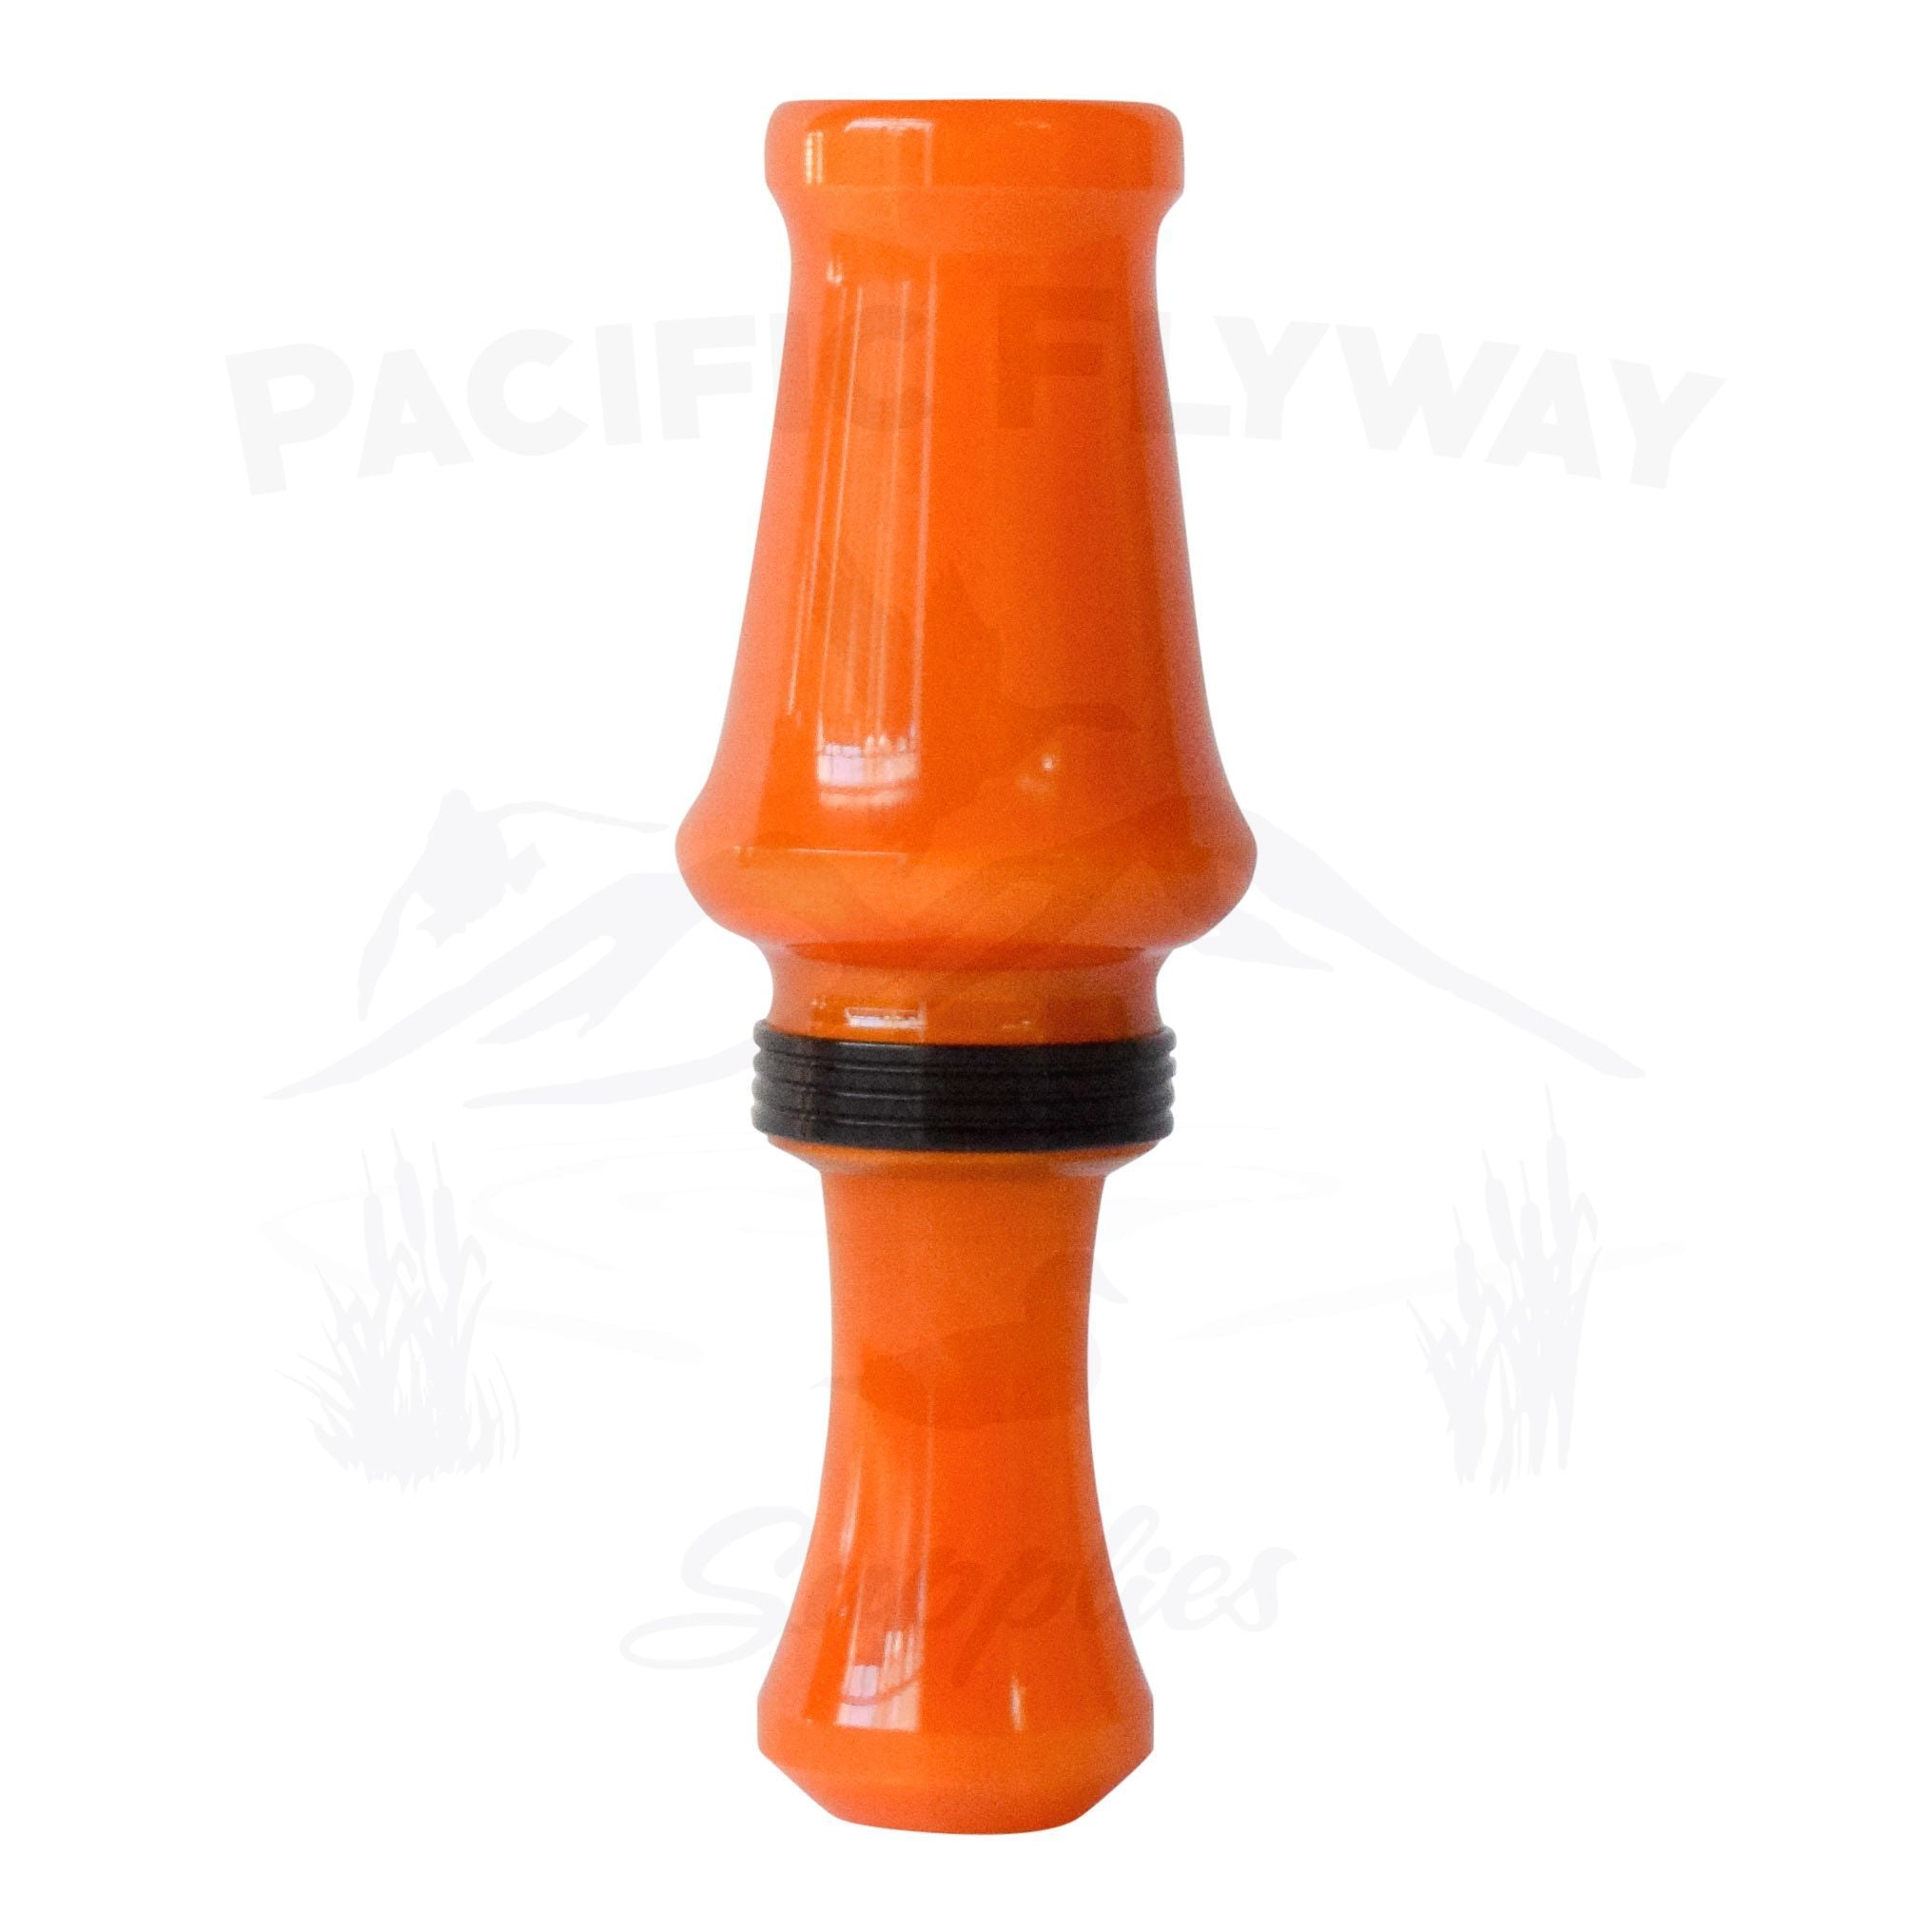 J. J. Lares Hybrid Duck Call - Polished Orange Pearl Black Band - Pacific Flyway Supplies